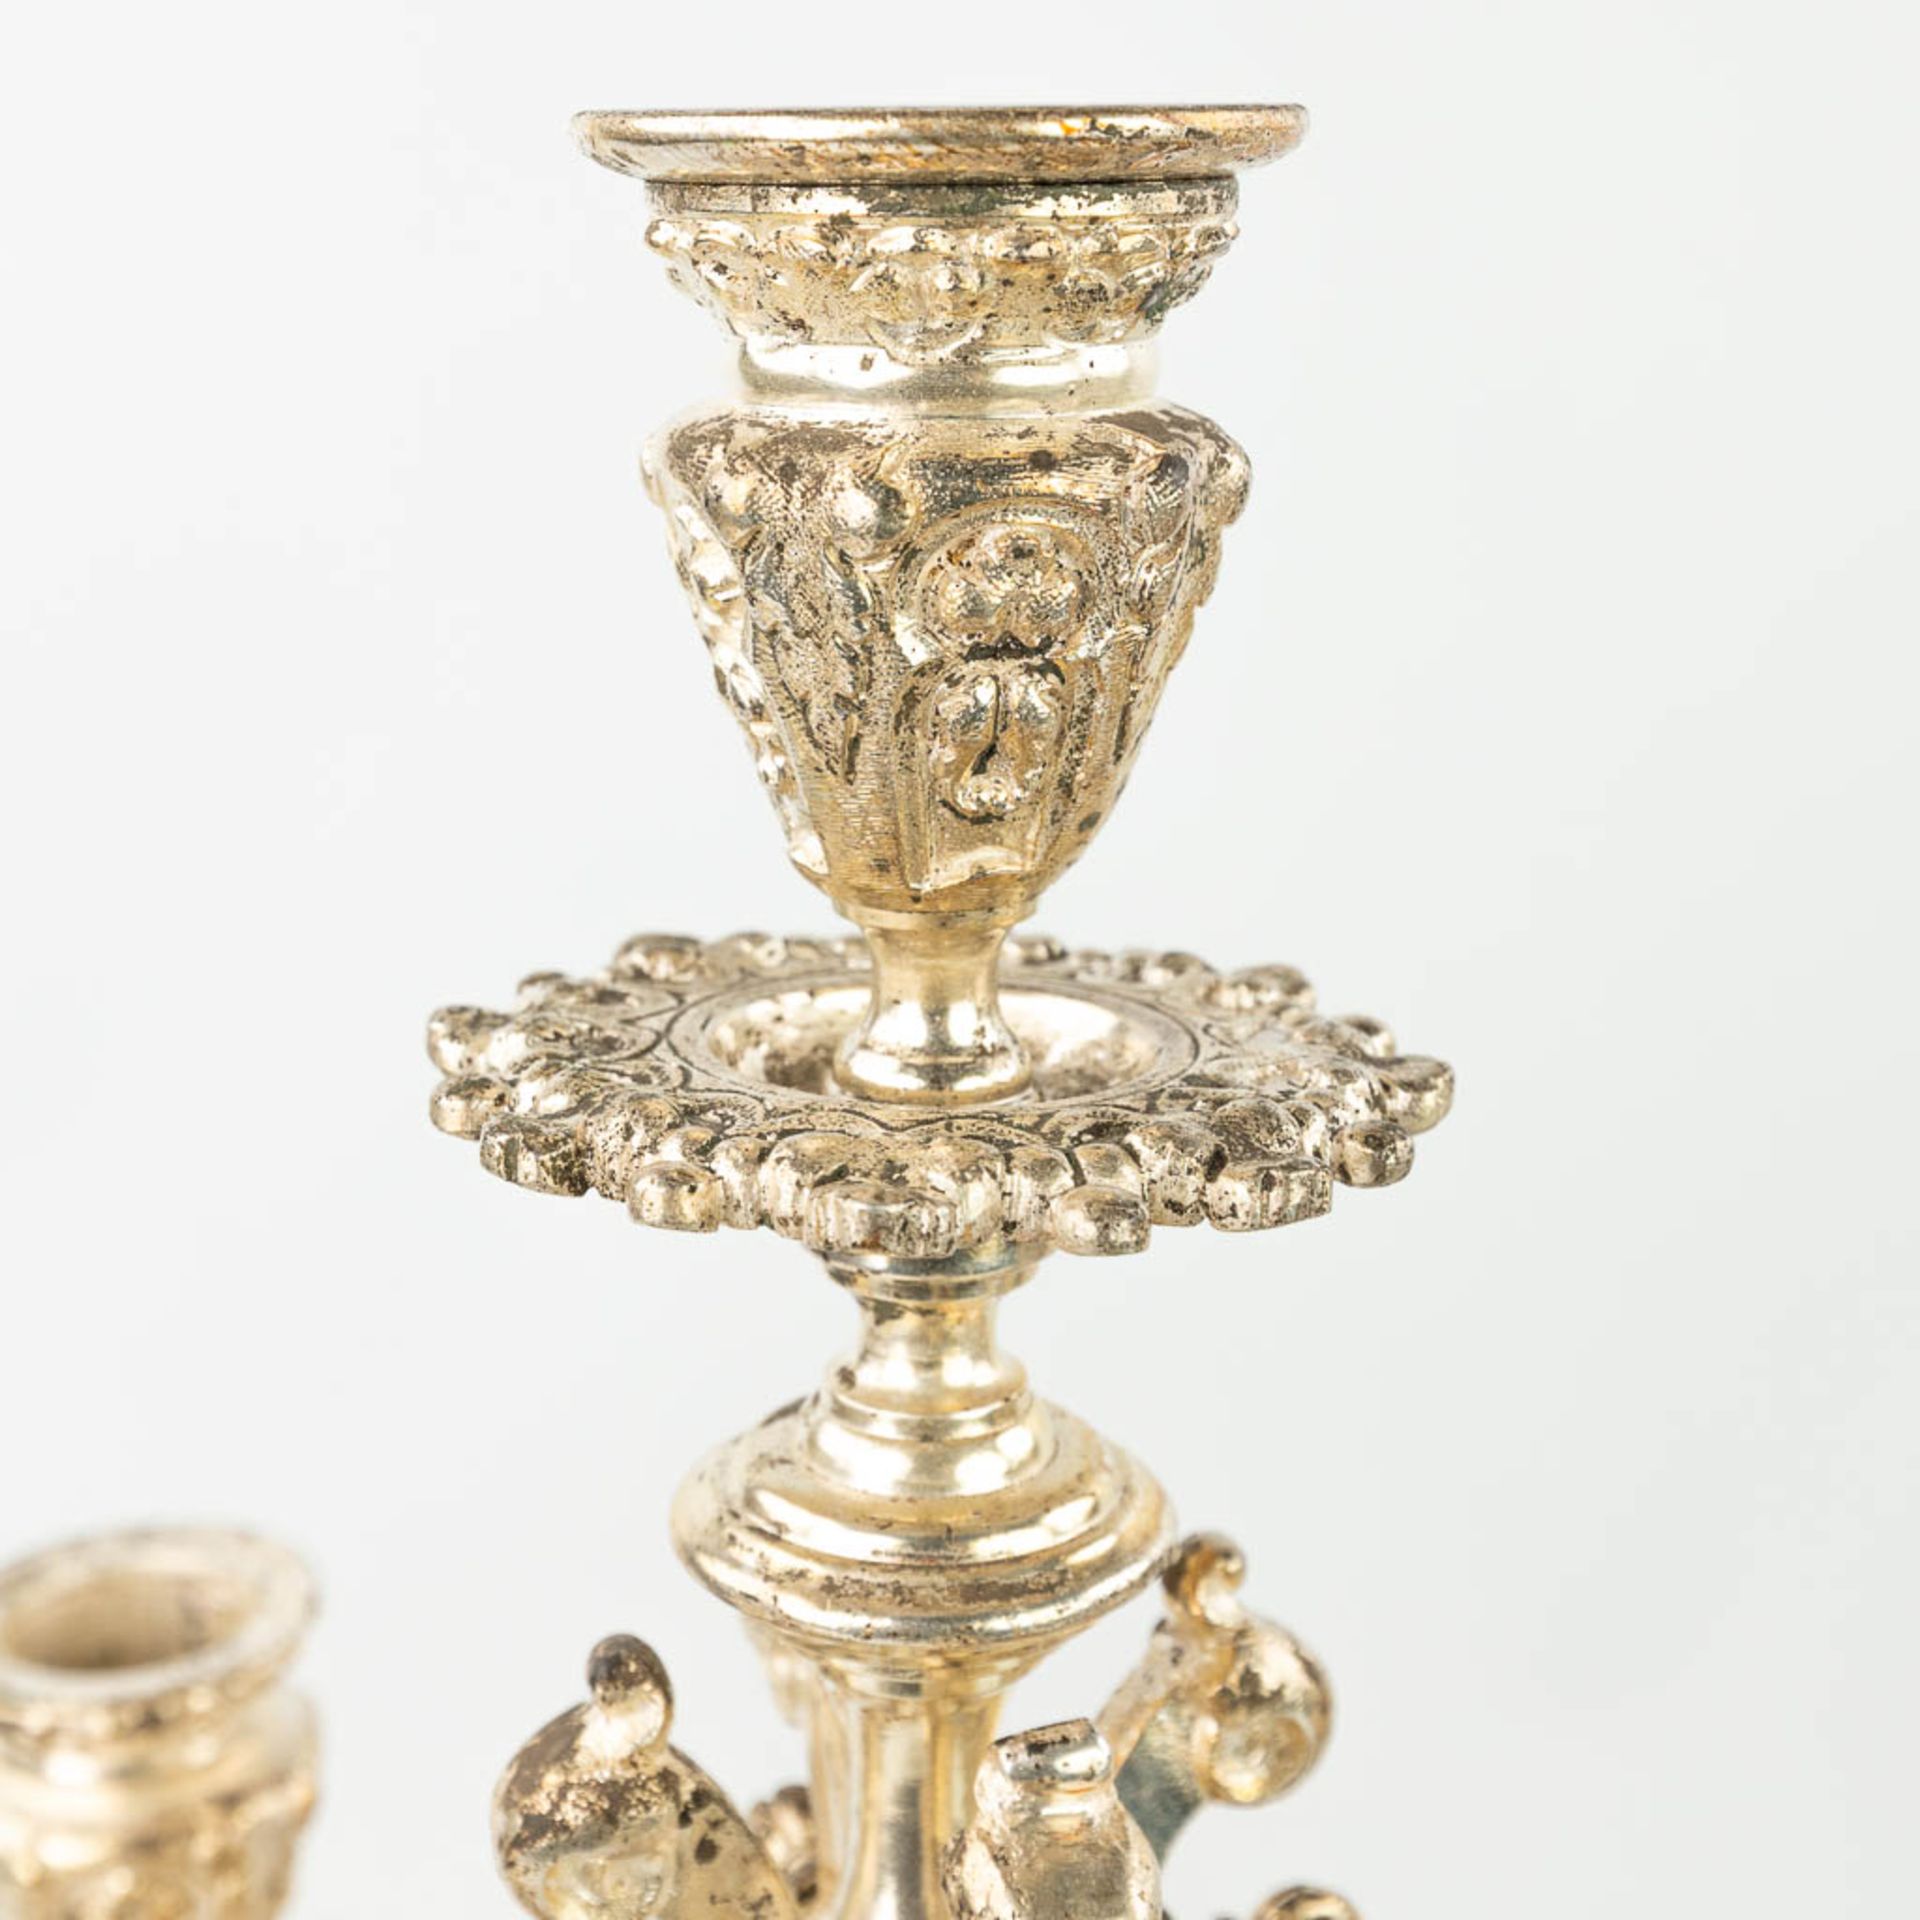 A three-piece garniture clock with candelabra, made of silver-plated bronze in gothic revival style. - Image 9 of 18